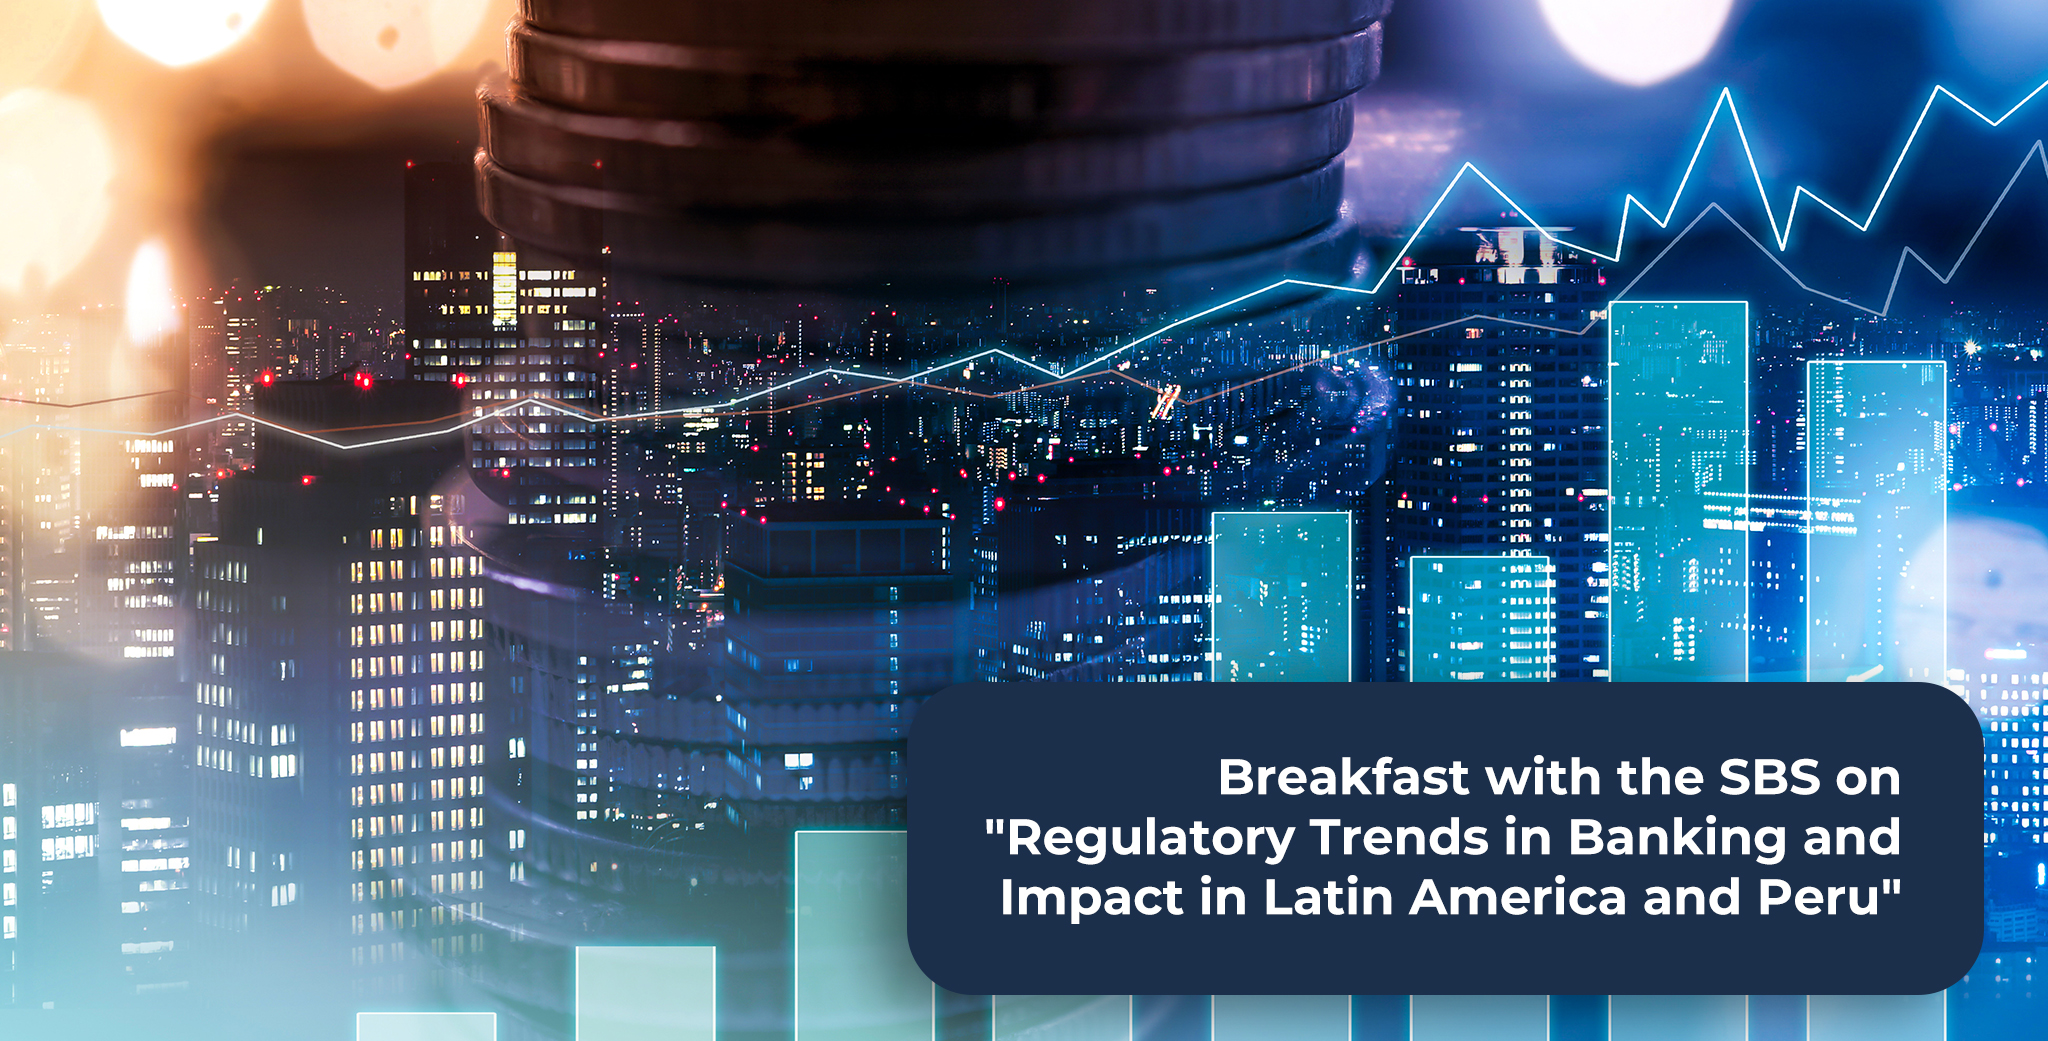 Breakfast with the SBS on "Regulatory Trends in Banking and Impact in Latin America and Peru"